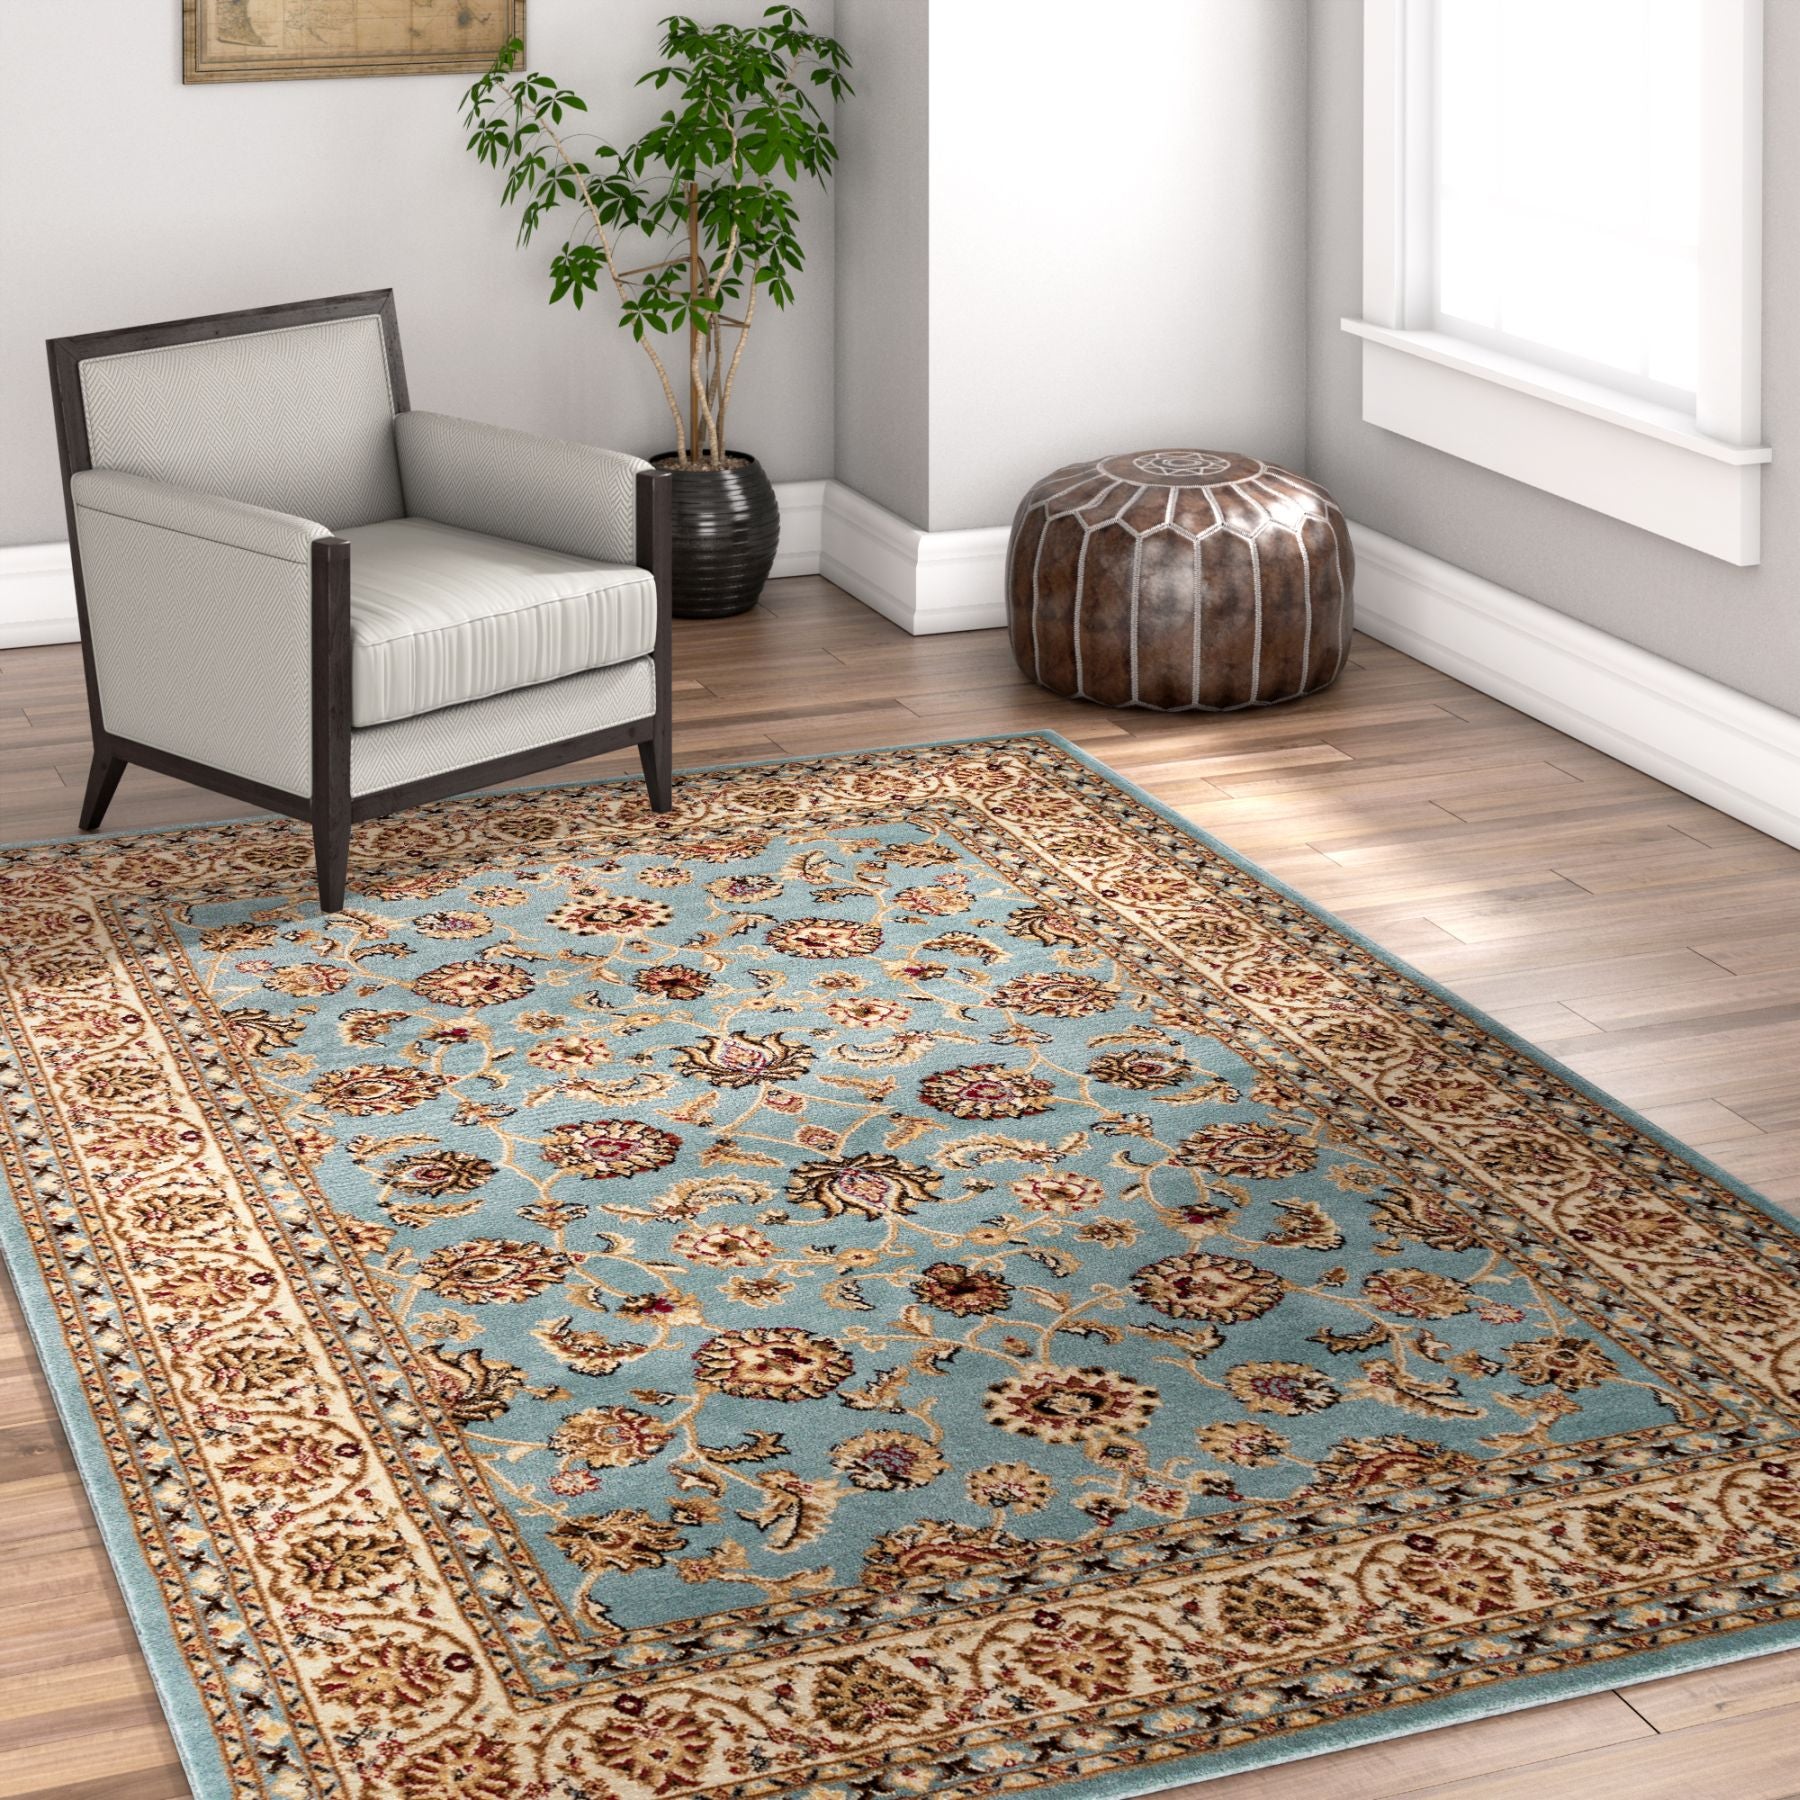 Noble Sarouk Light Blue Persian Floral Oriental Formal Traditional Area Rug Easy To Clean Stain Fade Resistant Shed Free Modern Contemporary Transitional Soft Living Dining Room Rug RugLotscom